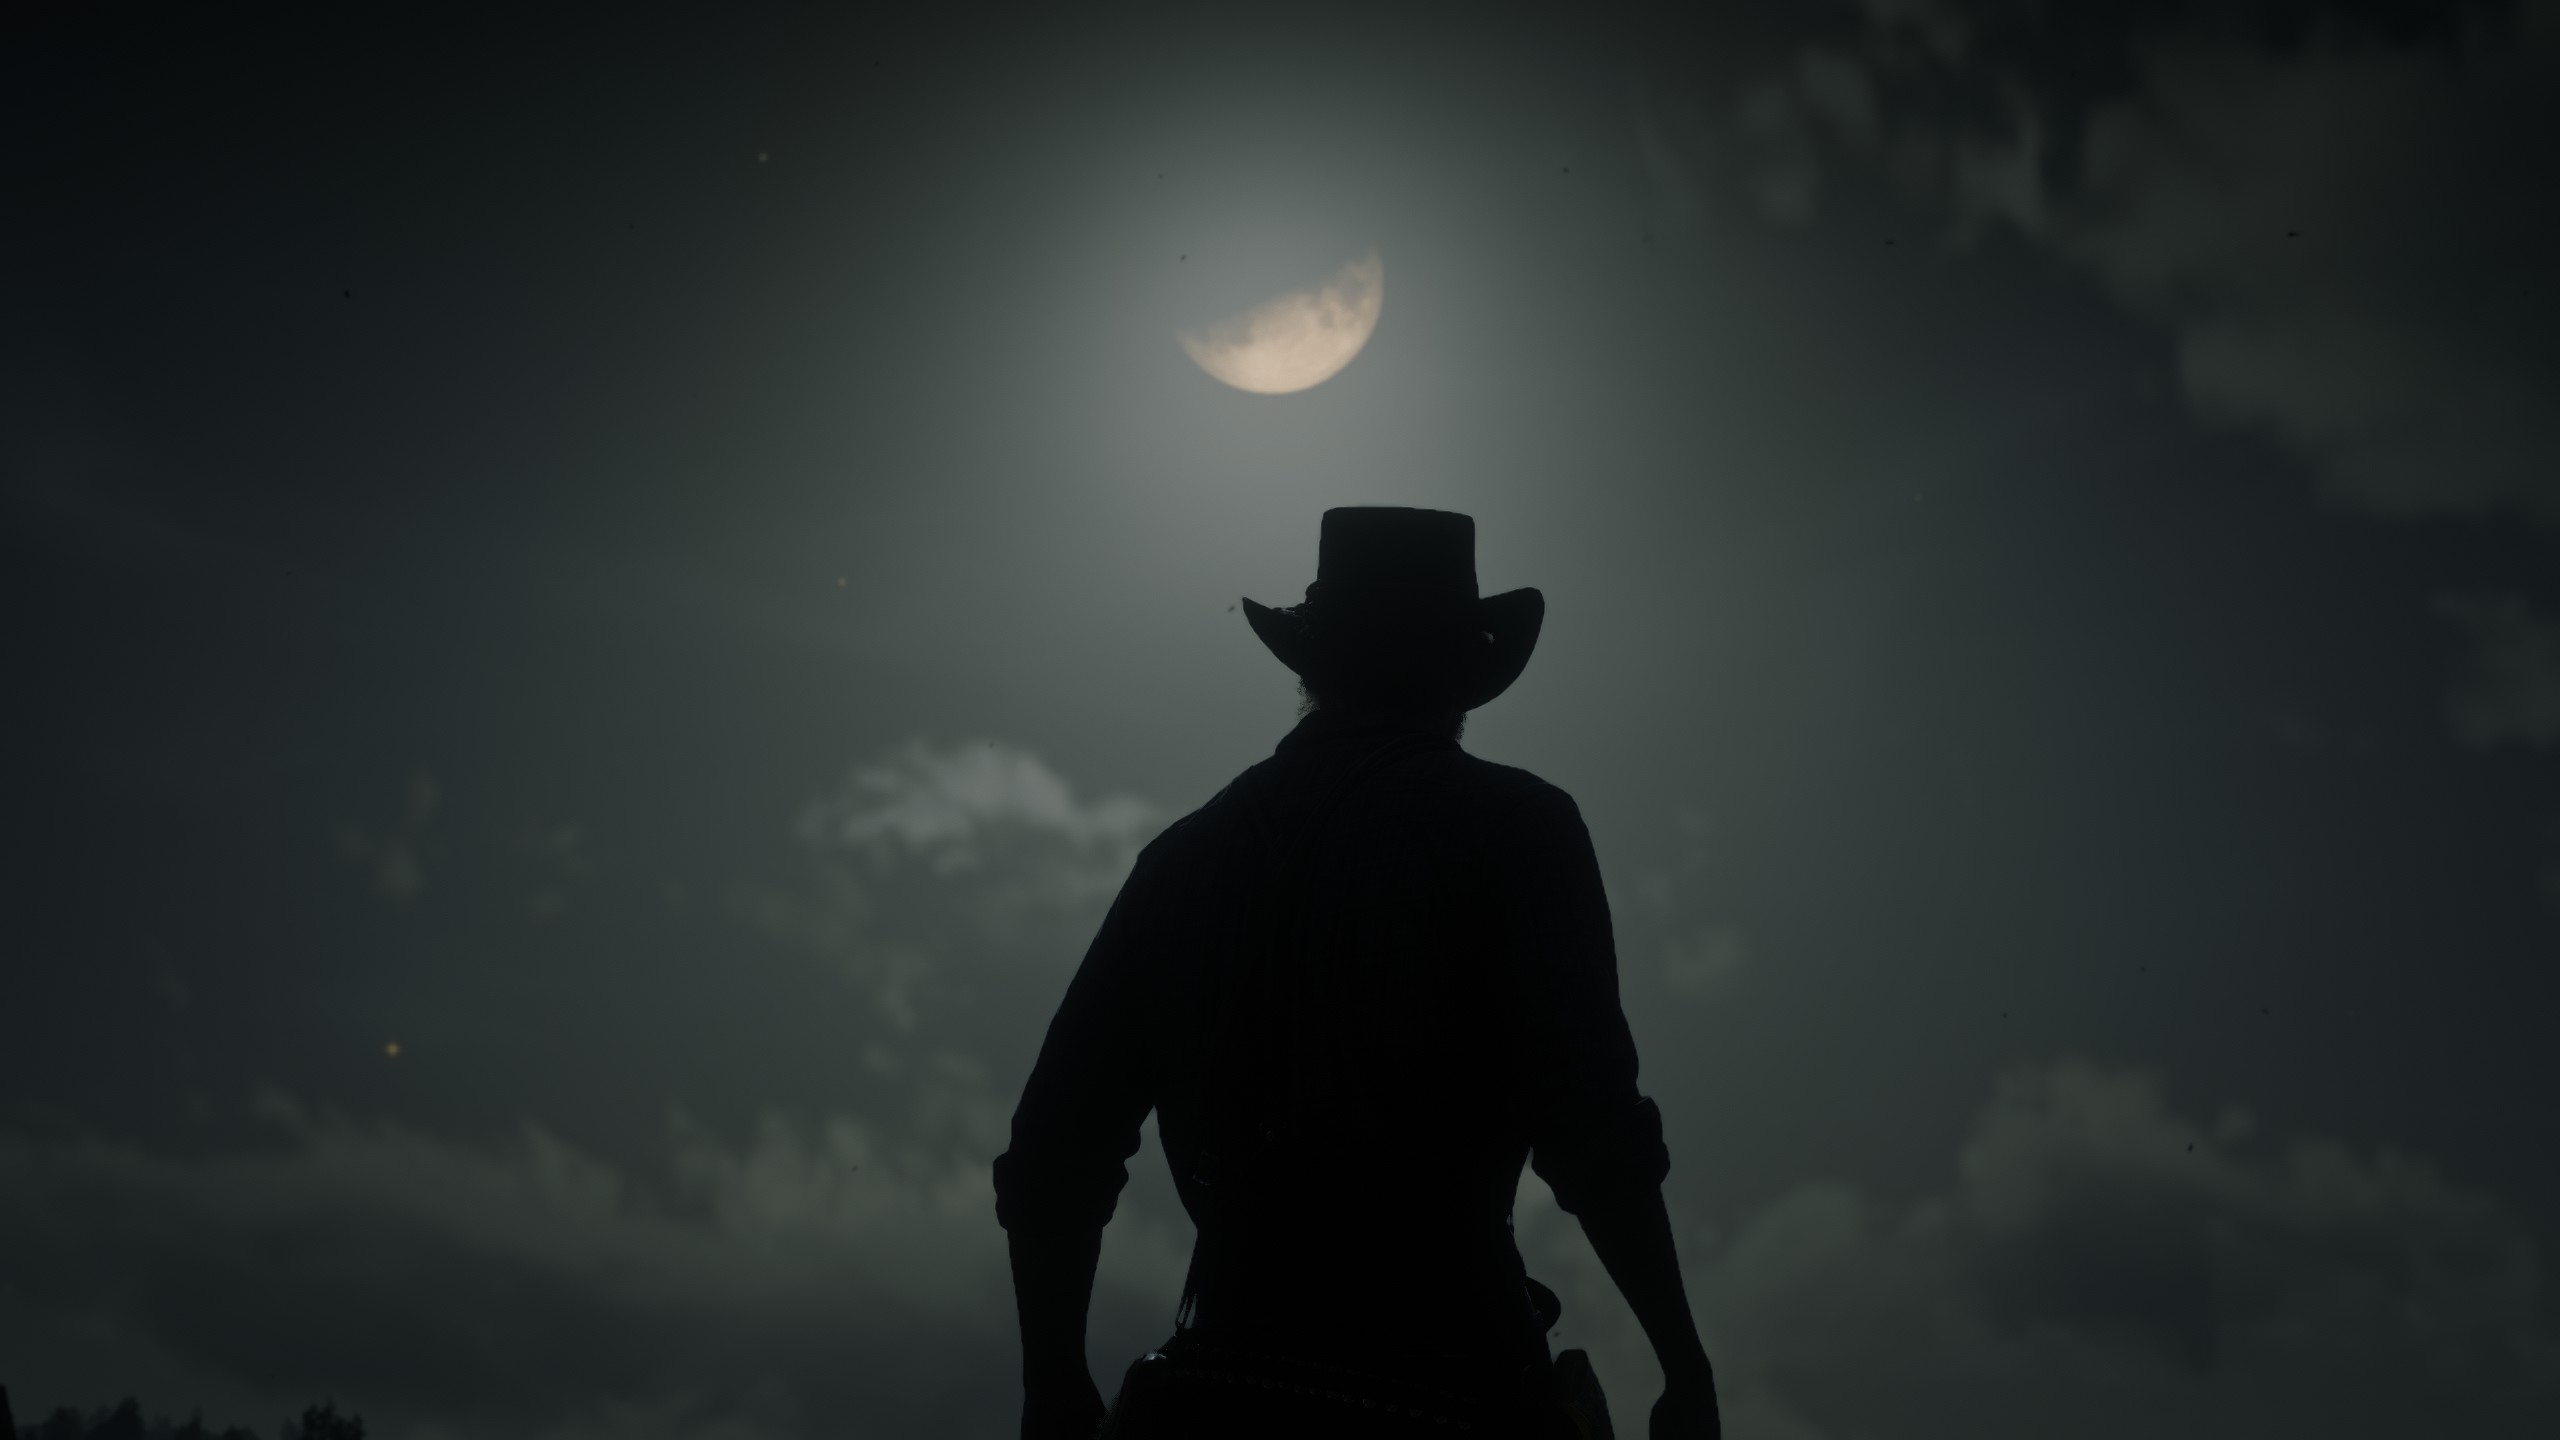 General 2560x1440 Red Dead Redemption 2 Rockstar Games cowboy Arthur Morgan digital art Red Dead Redemption sky video games moonlight cowboy hats standing video game art screen shot video game men night video game characters CGI Moon clouds hat silhouette